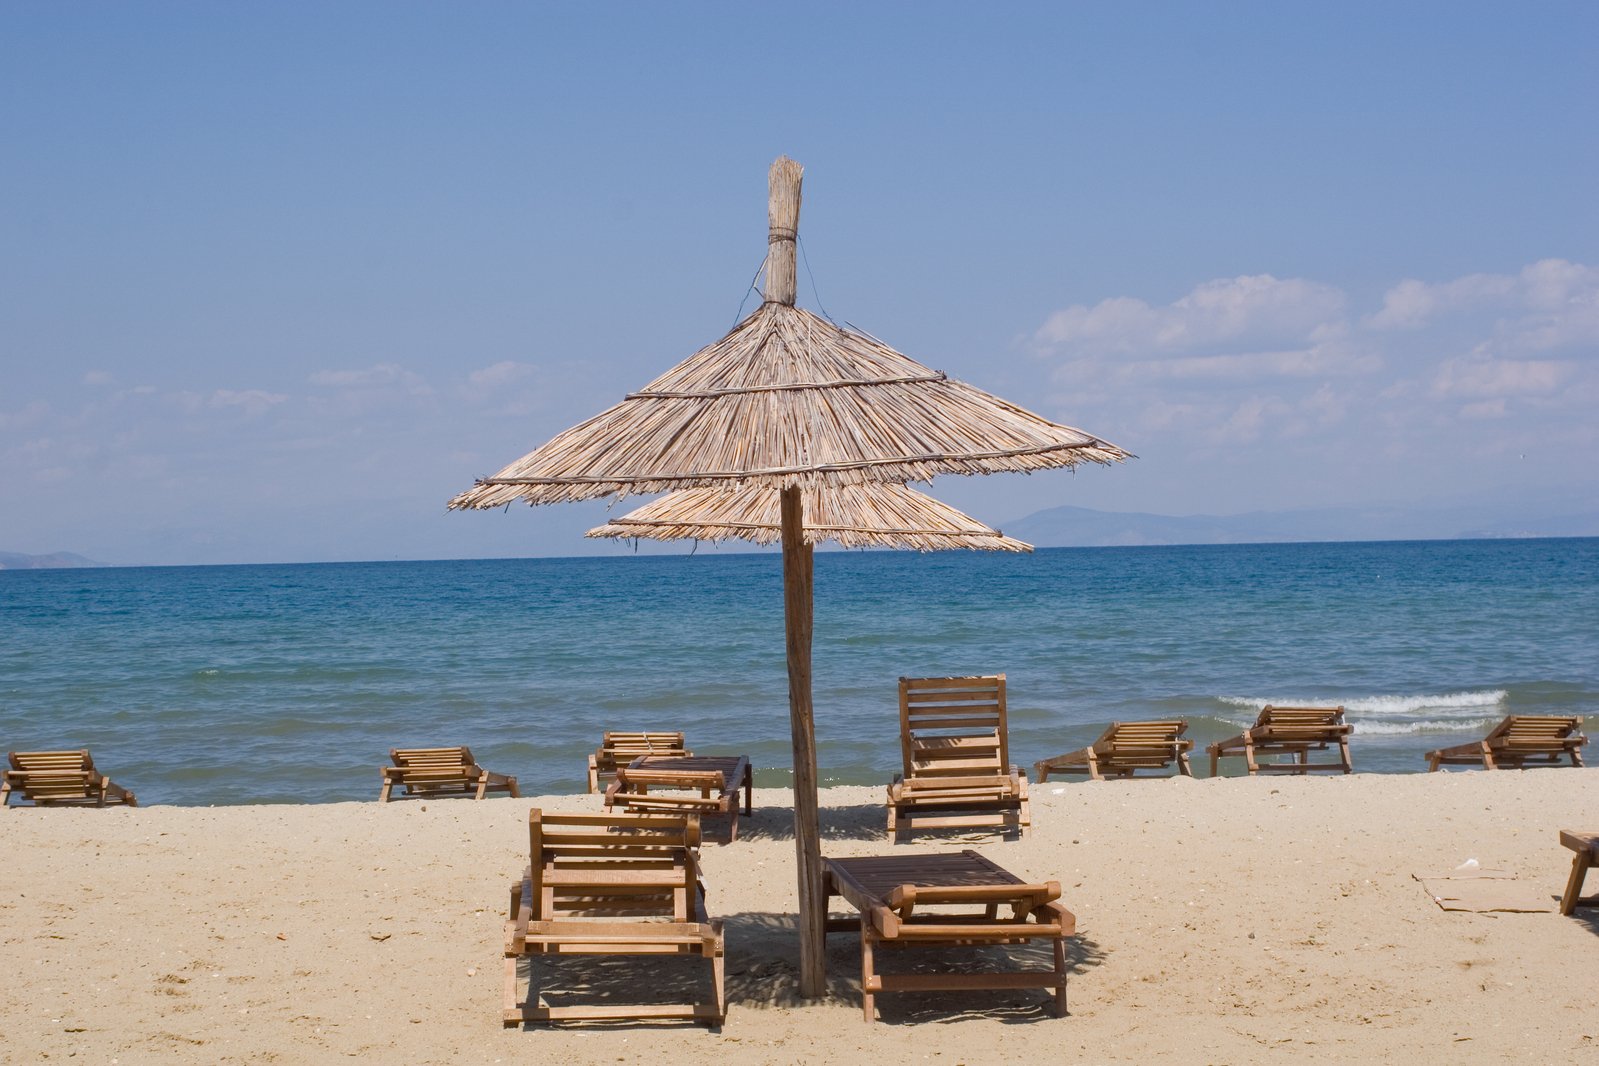 a wooden beach umbrella next to lounge chairs